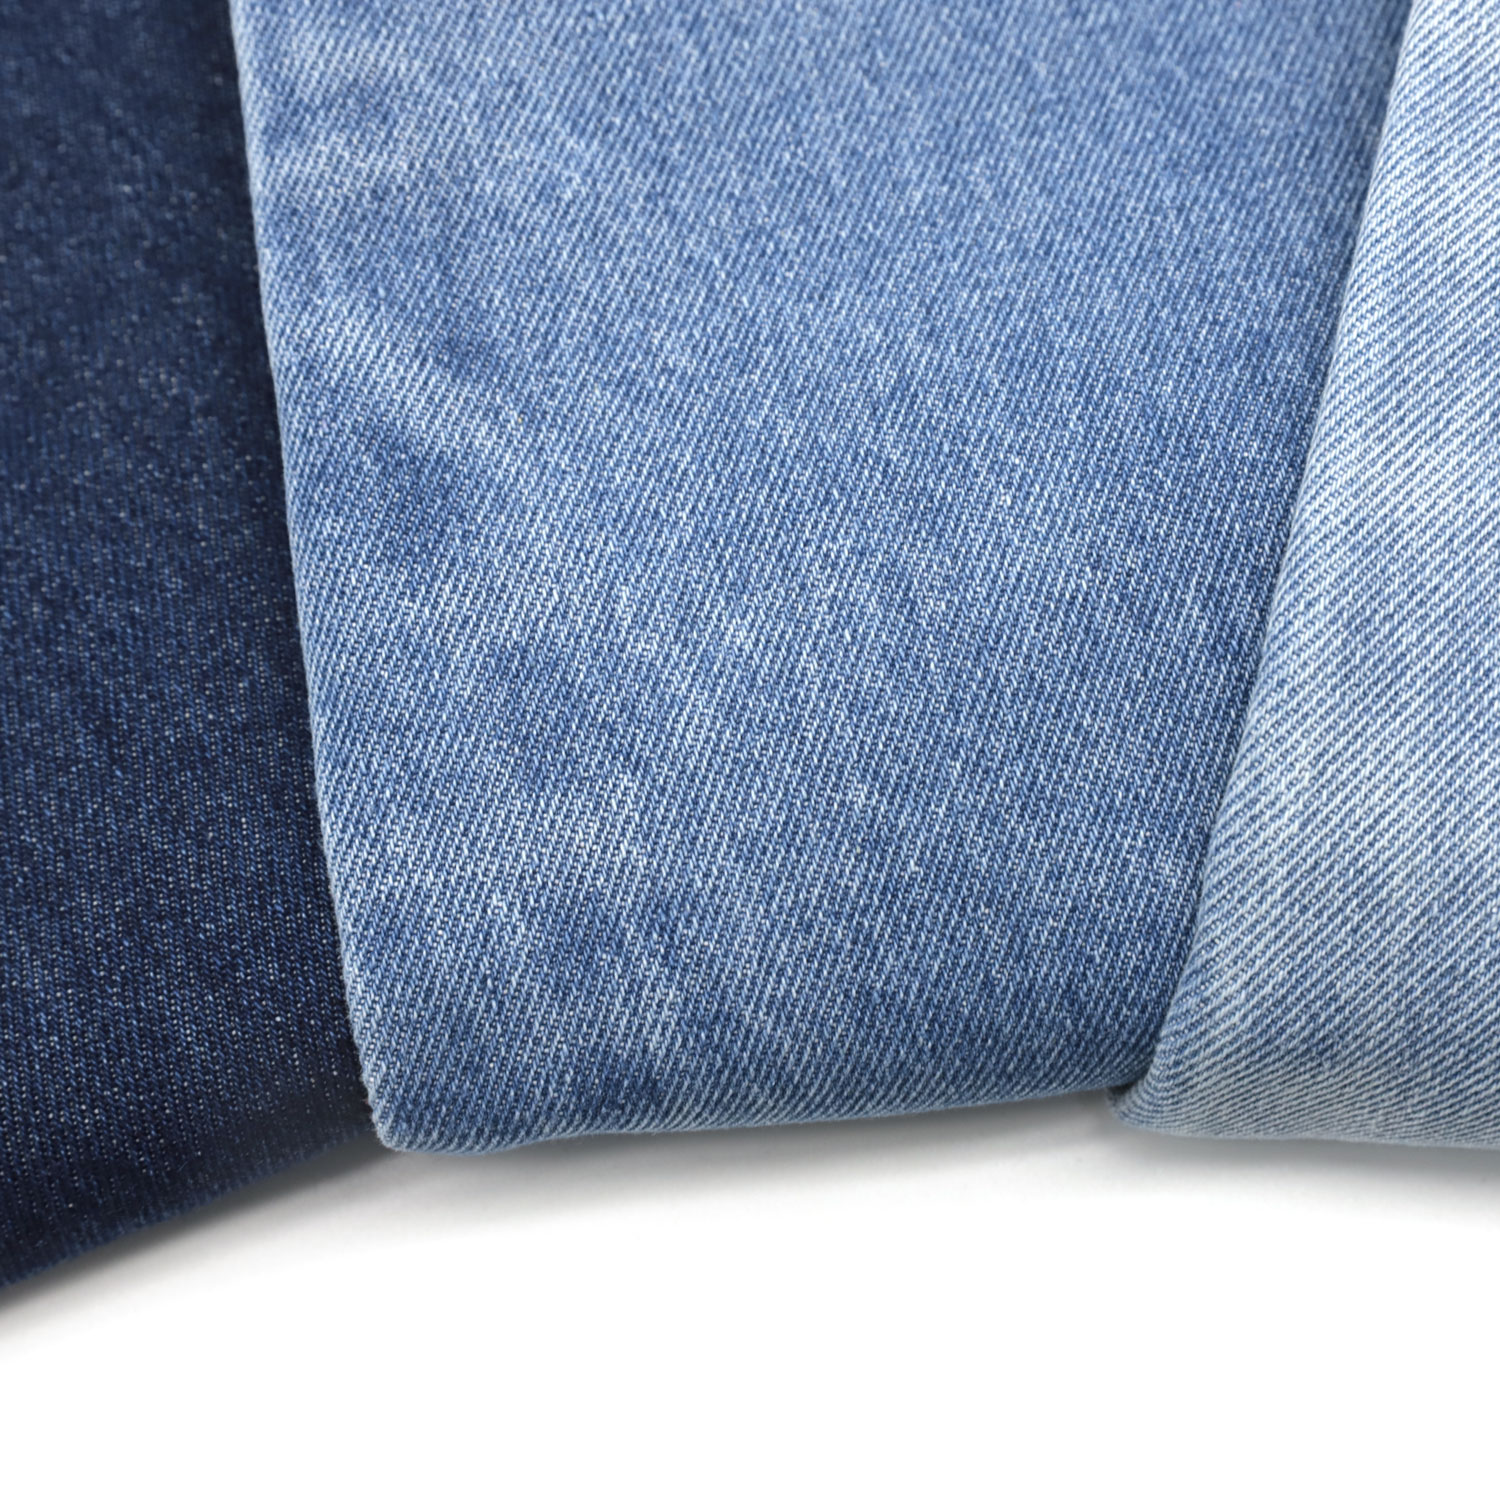 Best 5 Tips to Choose a Twill Denim Fabric 2